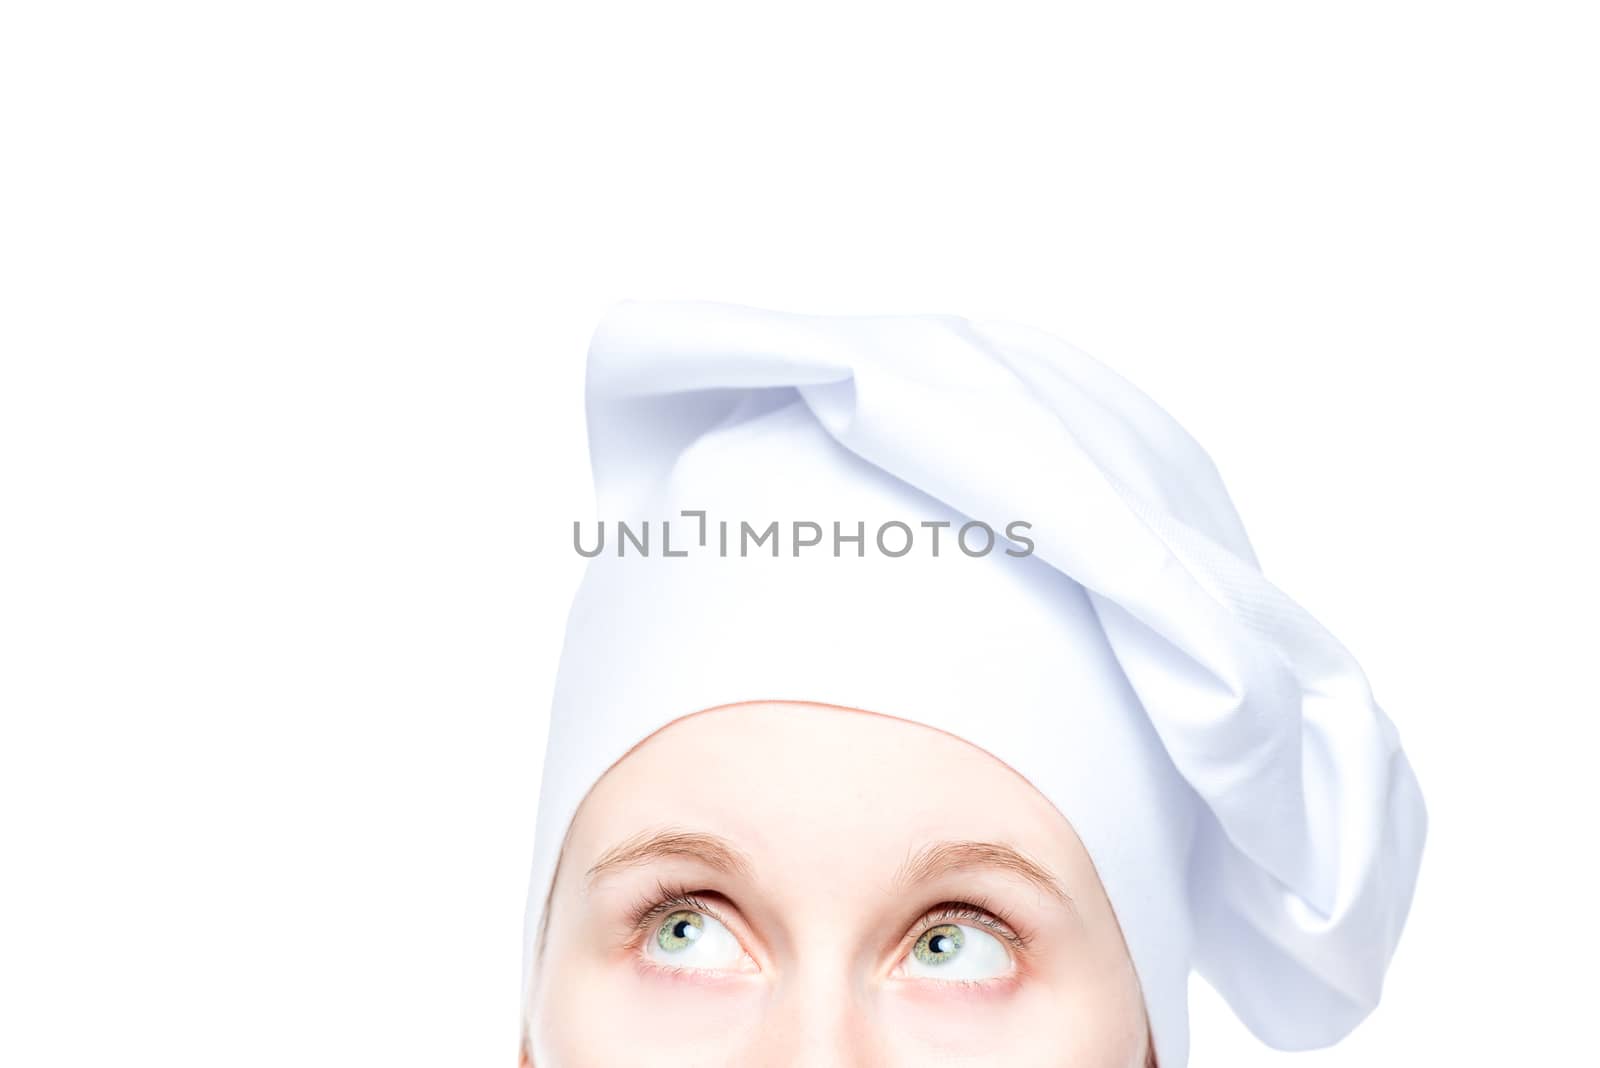 eyes of cook in hat close up on white background by kosmsos111